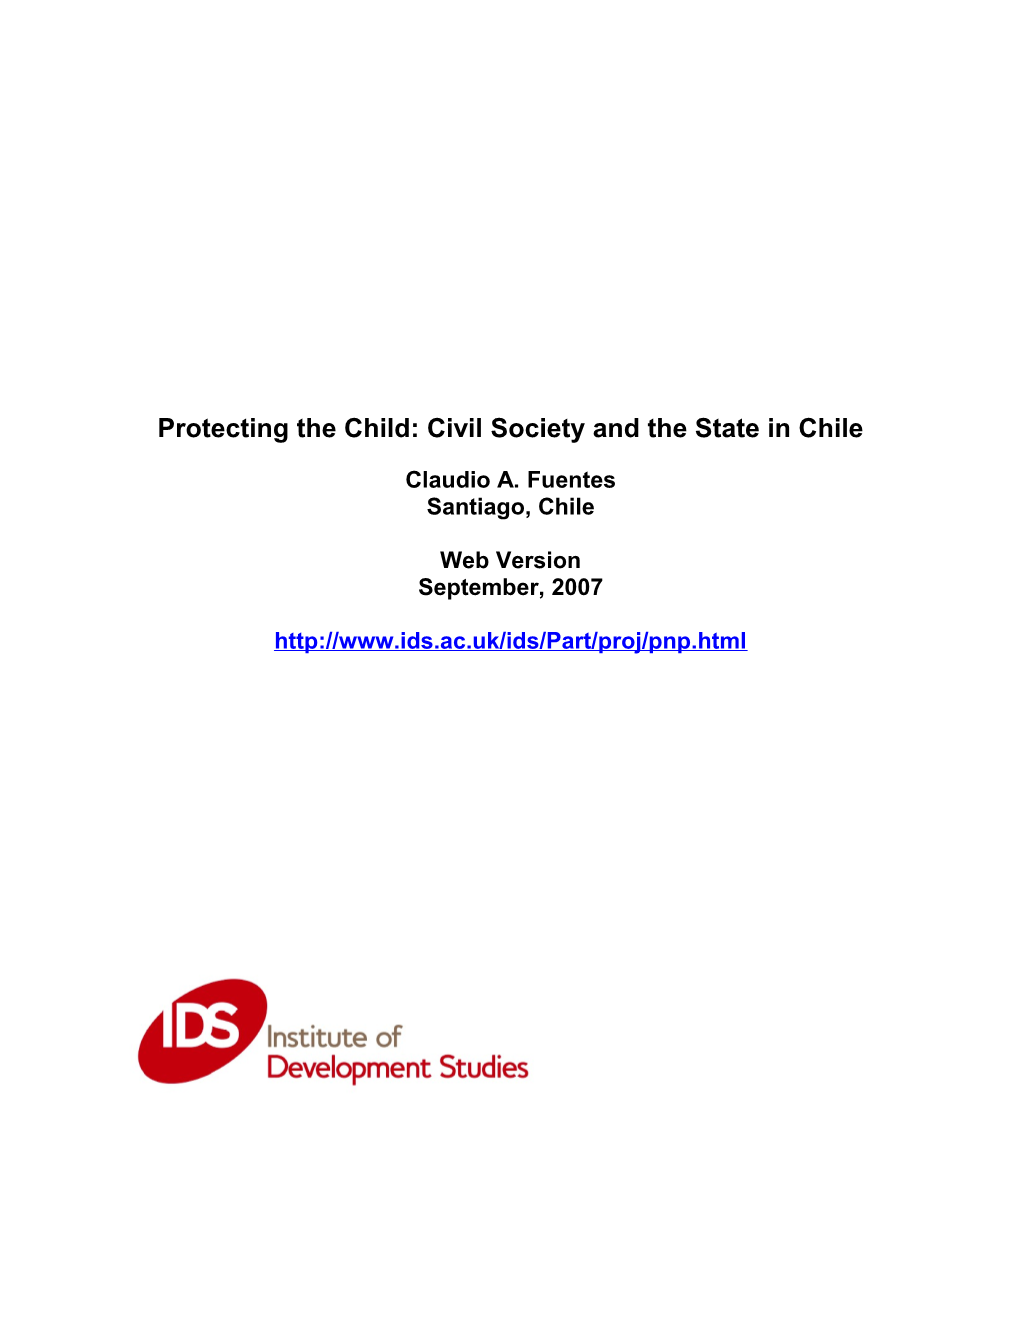 Protecting the Child: Civil Society and the State in Chile